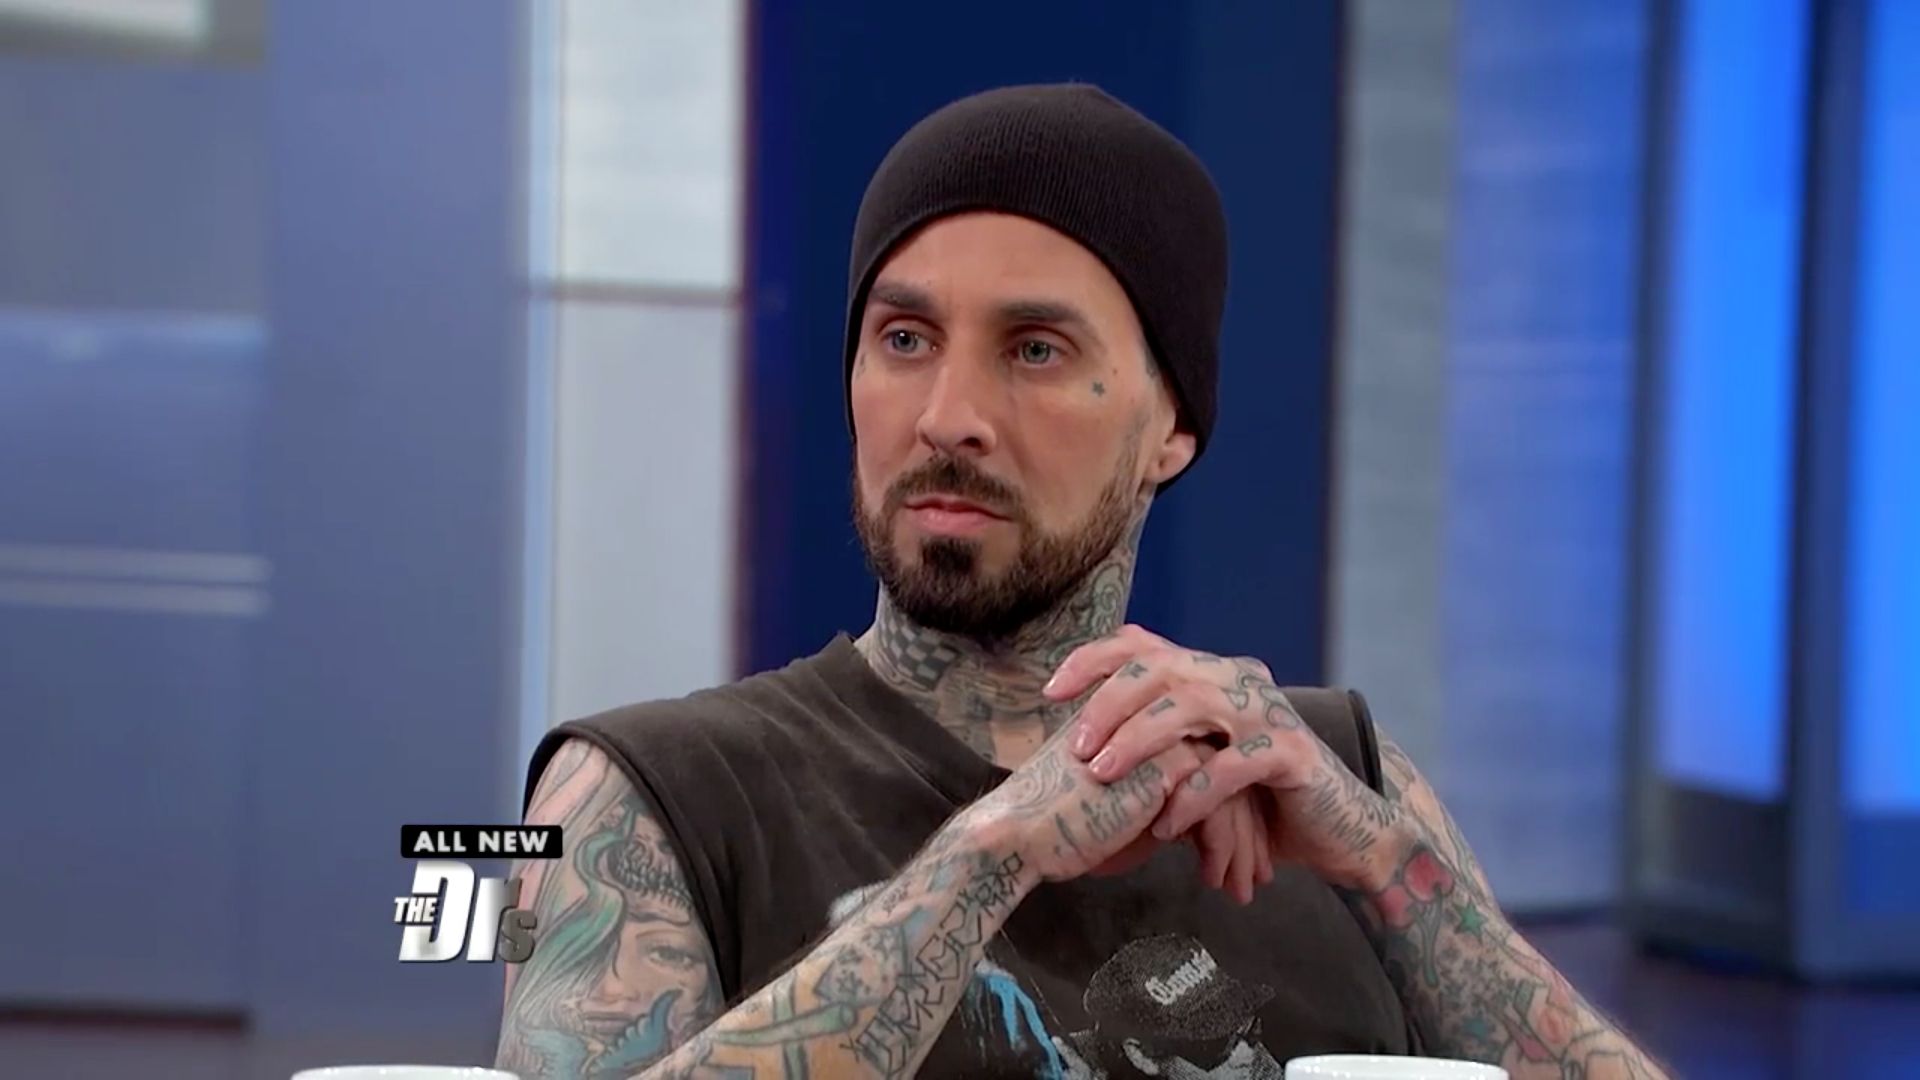 what disease does travis barker have